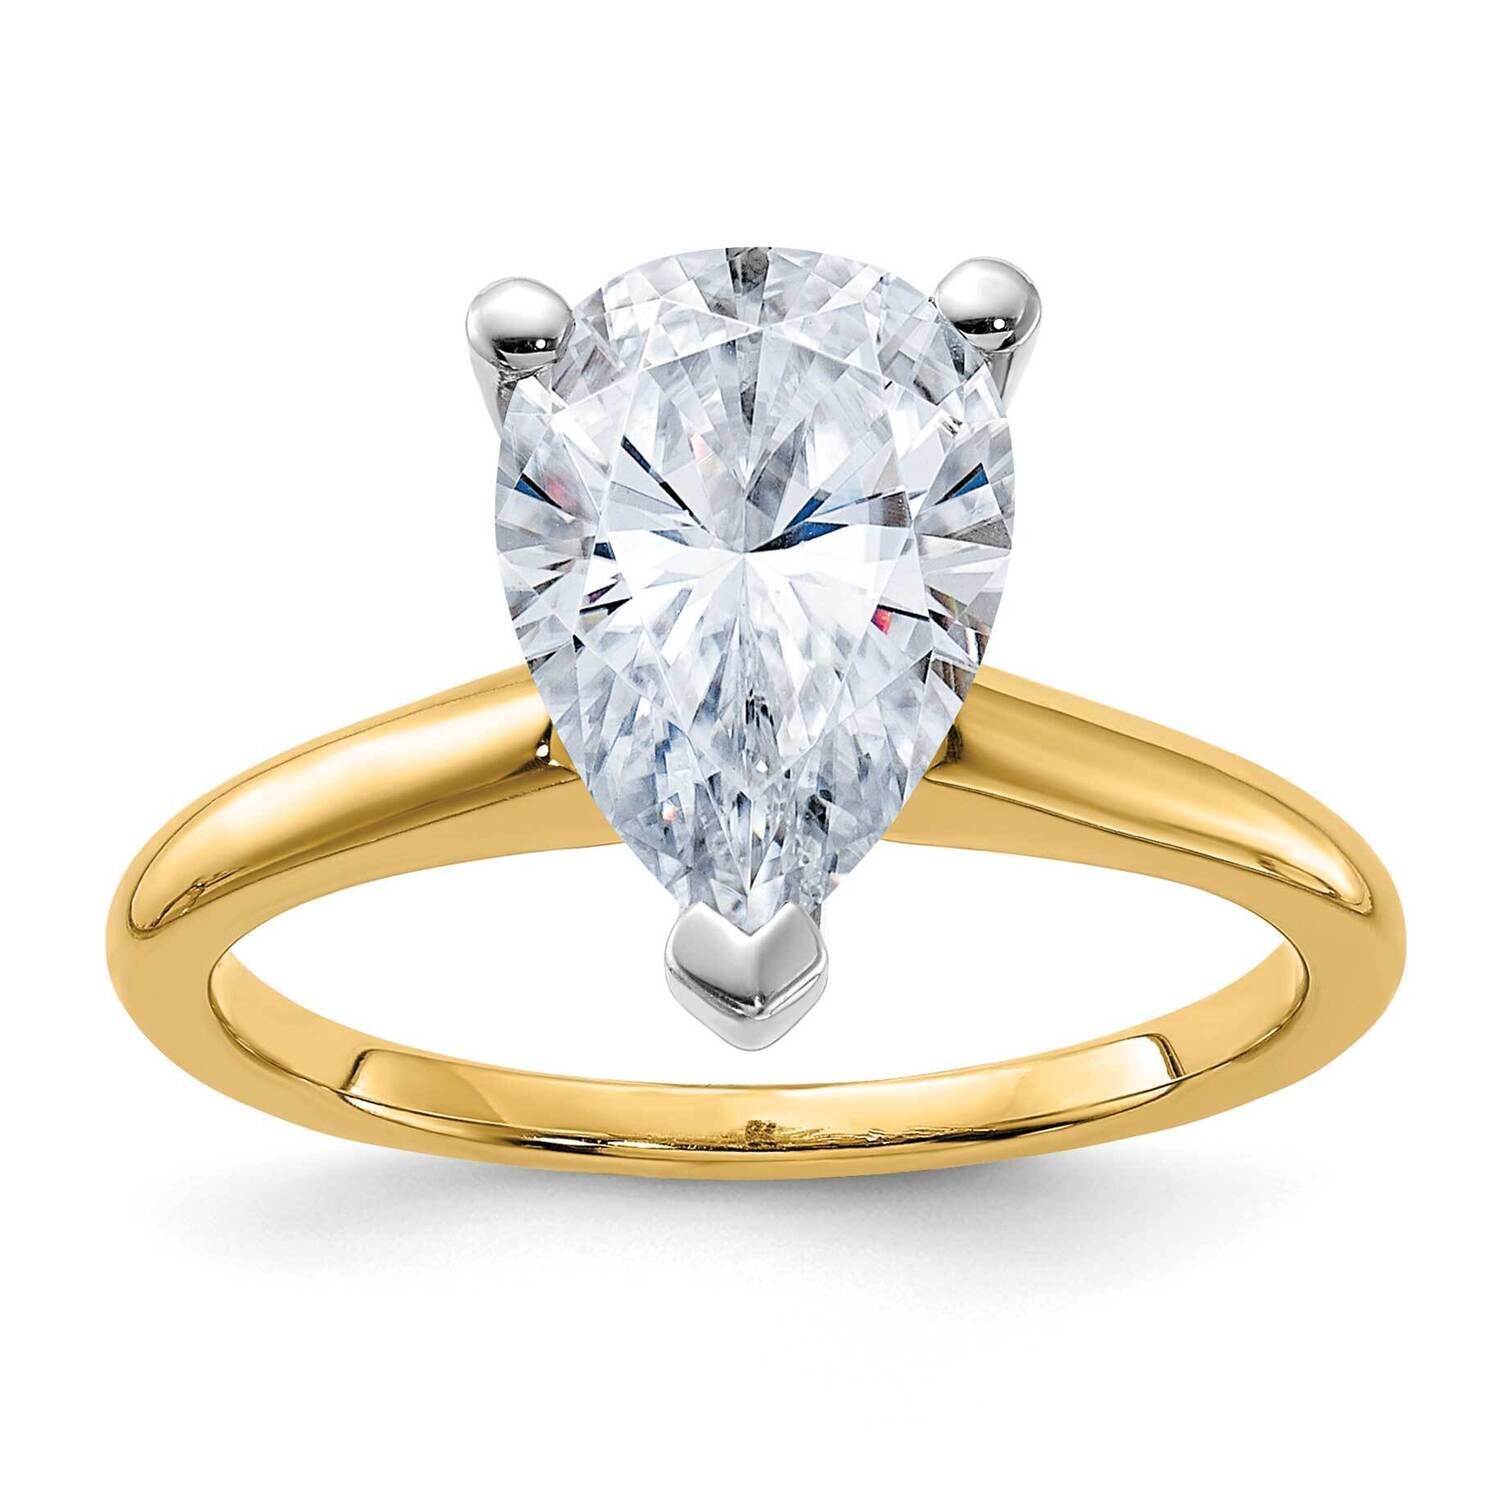 3 1/2ct. D E F Pure Light Pear Moissanite Solitaire Ring 14k Two Tone Gold RM5965P-300-9MP